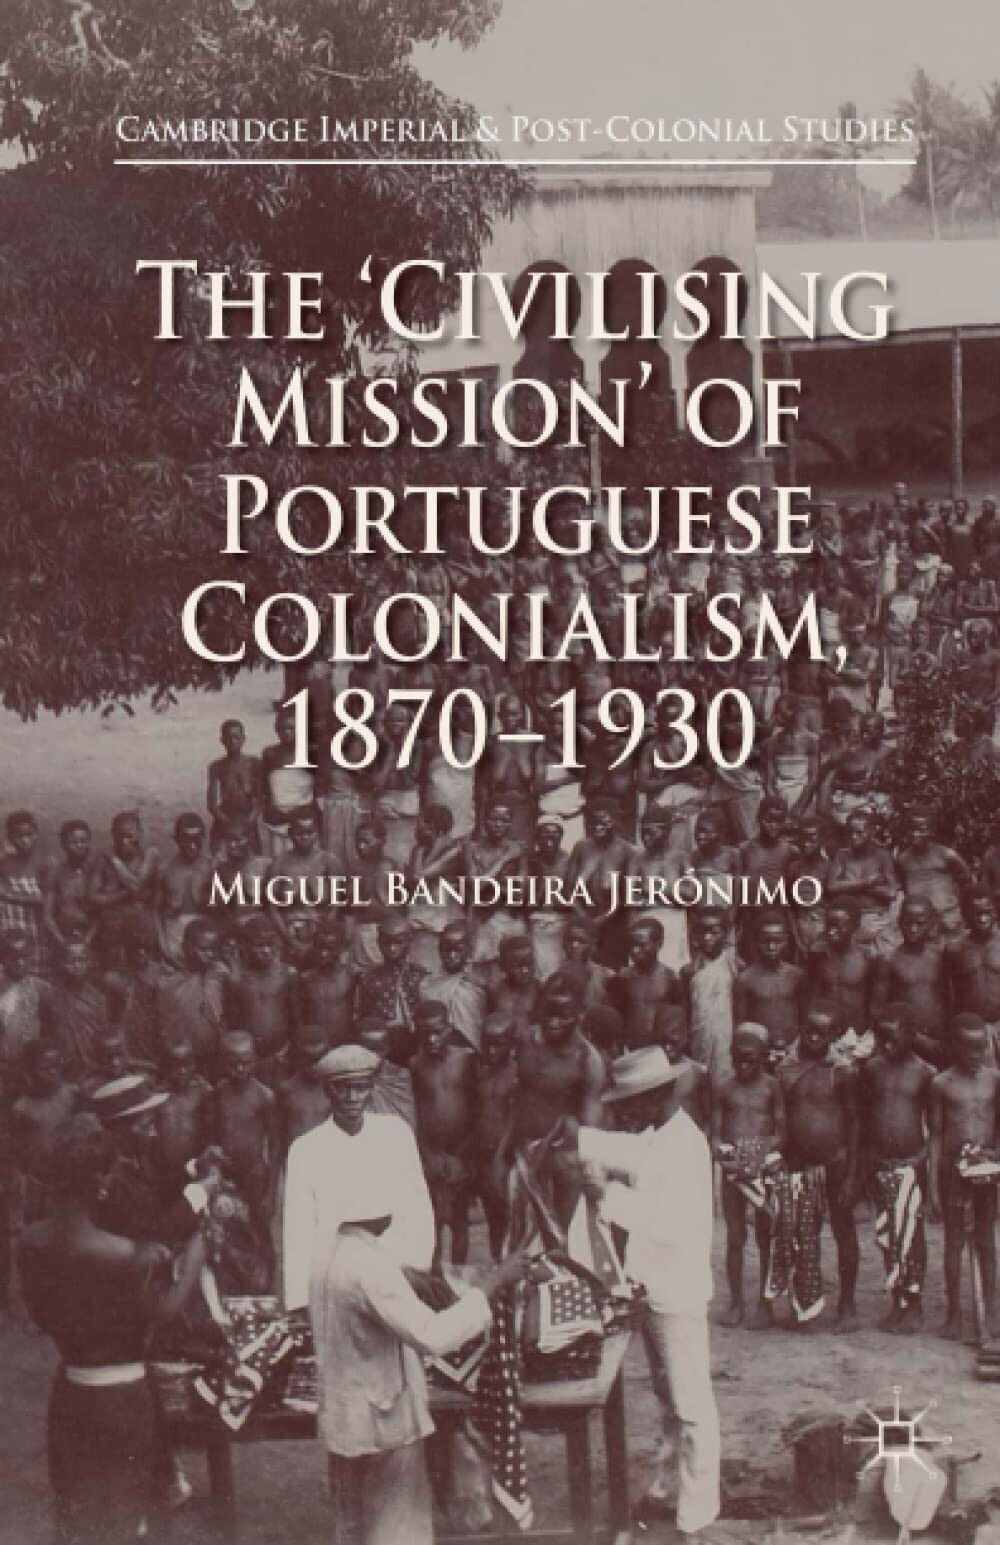 The 'Civilising Mission' of Portuguese Colonialism, 1870-1930 - Miguel Bandeir libro usato